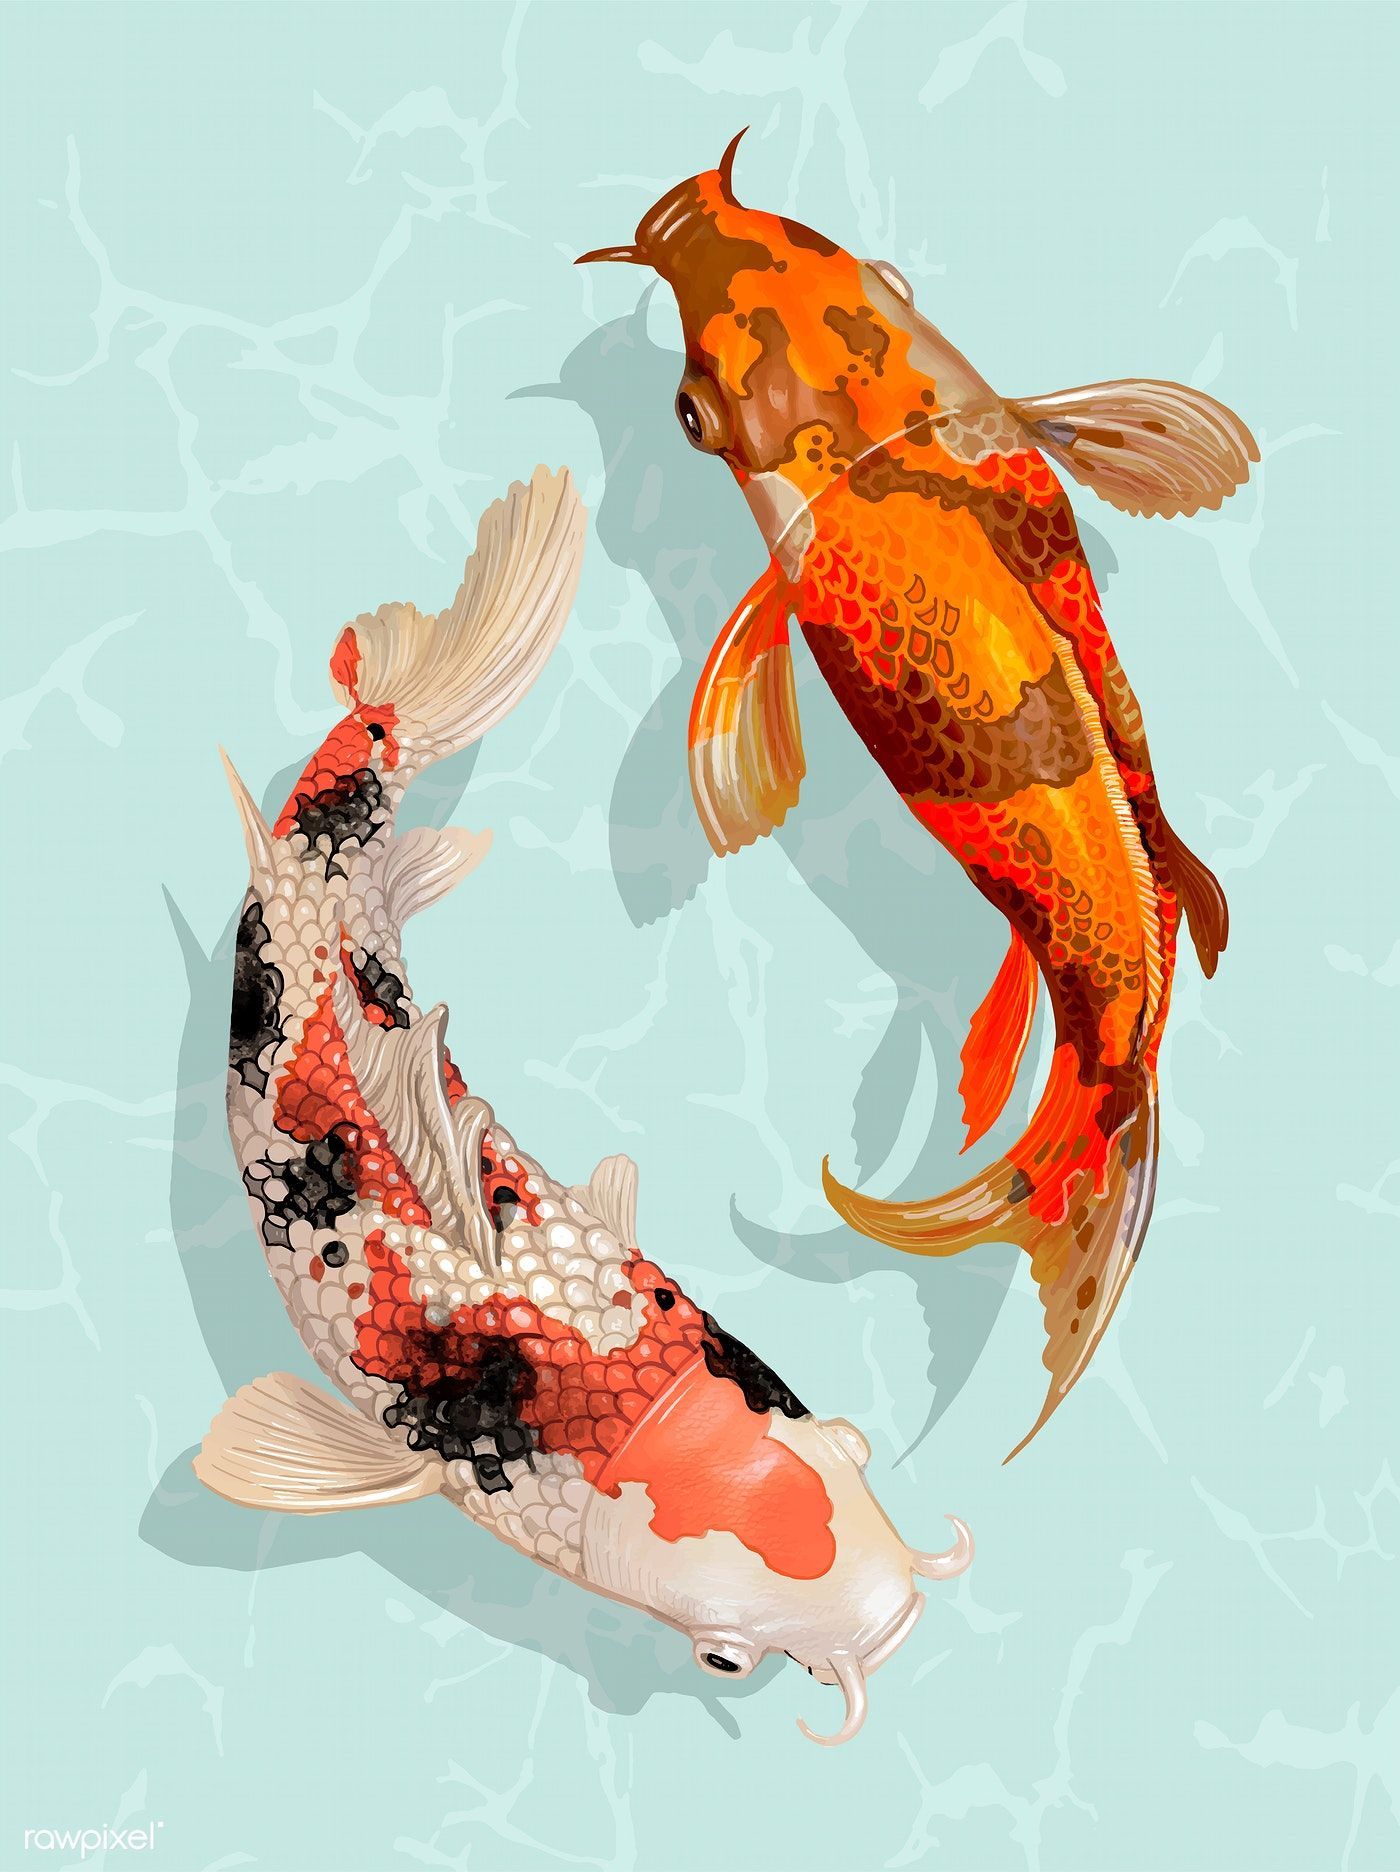 Two fish are swimming in a pond - Koi fish